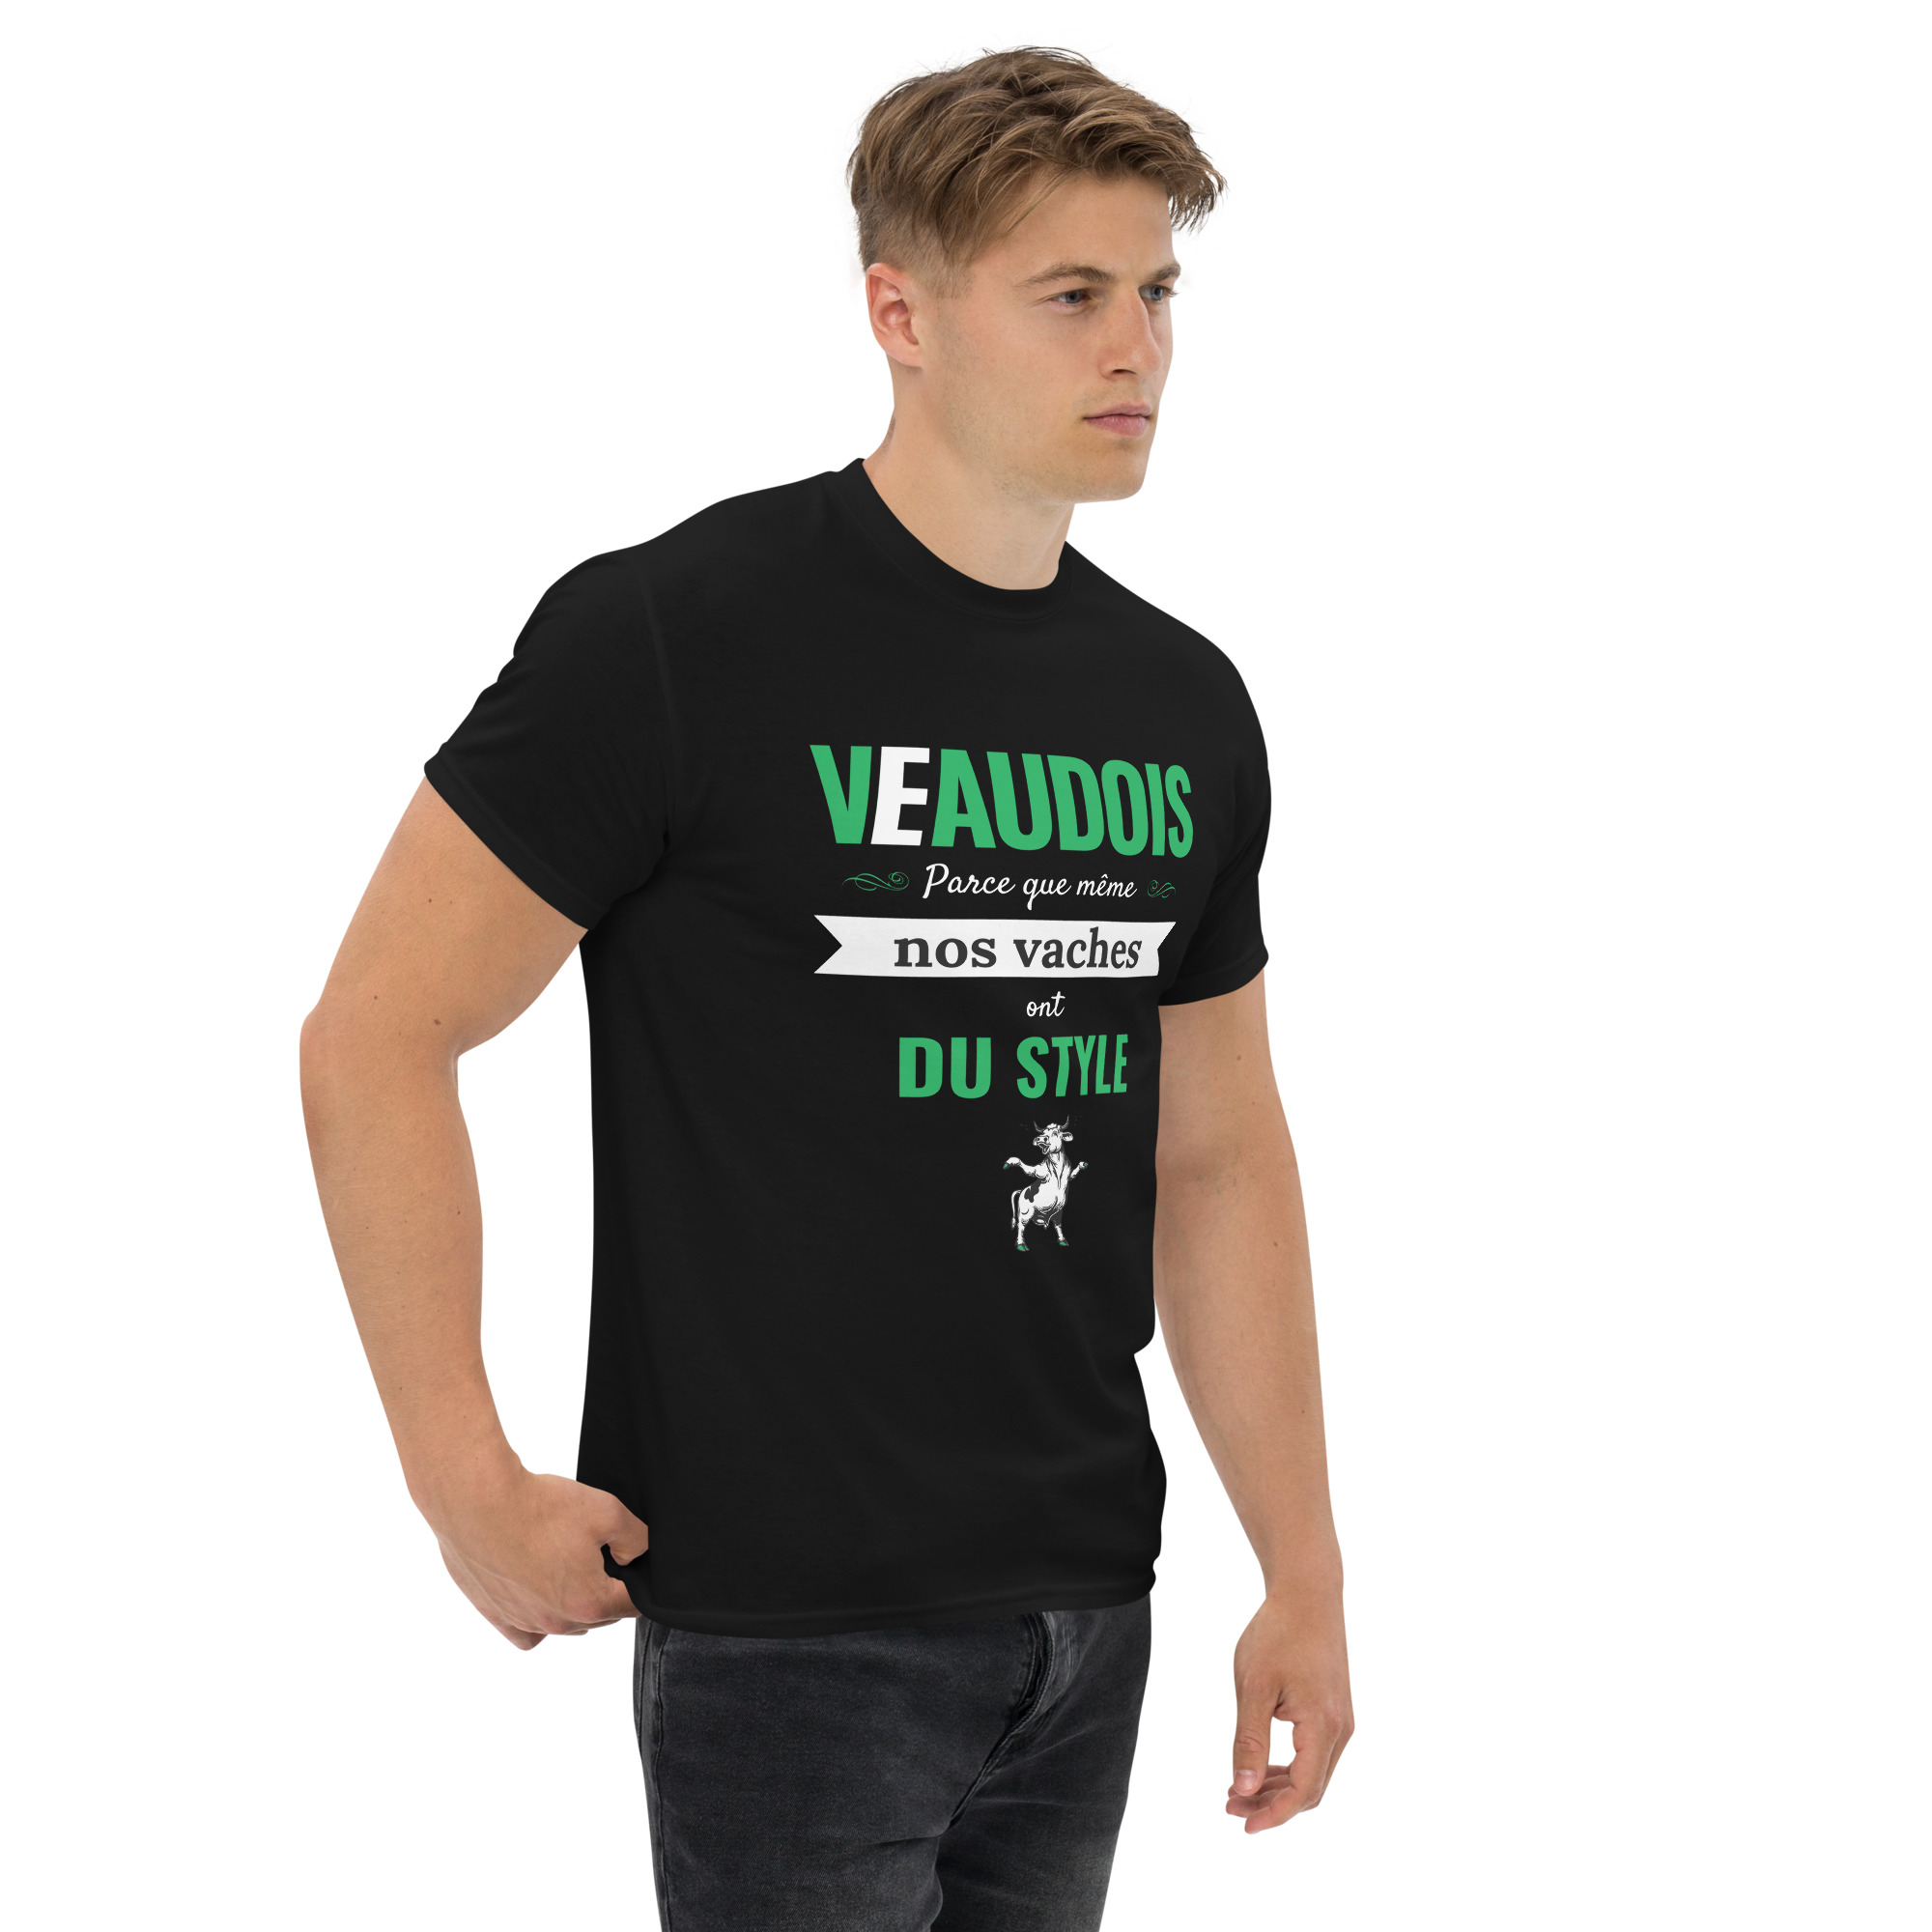 T-shirt – Les Vaudois – Because even our cows have style Men's Clothing Wearyt